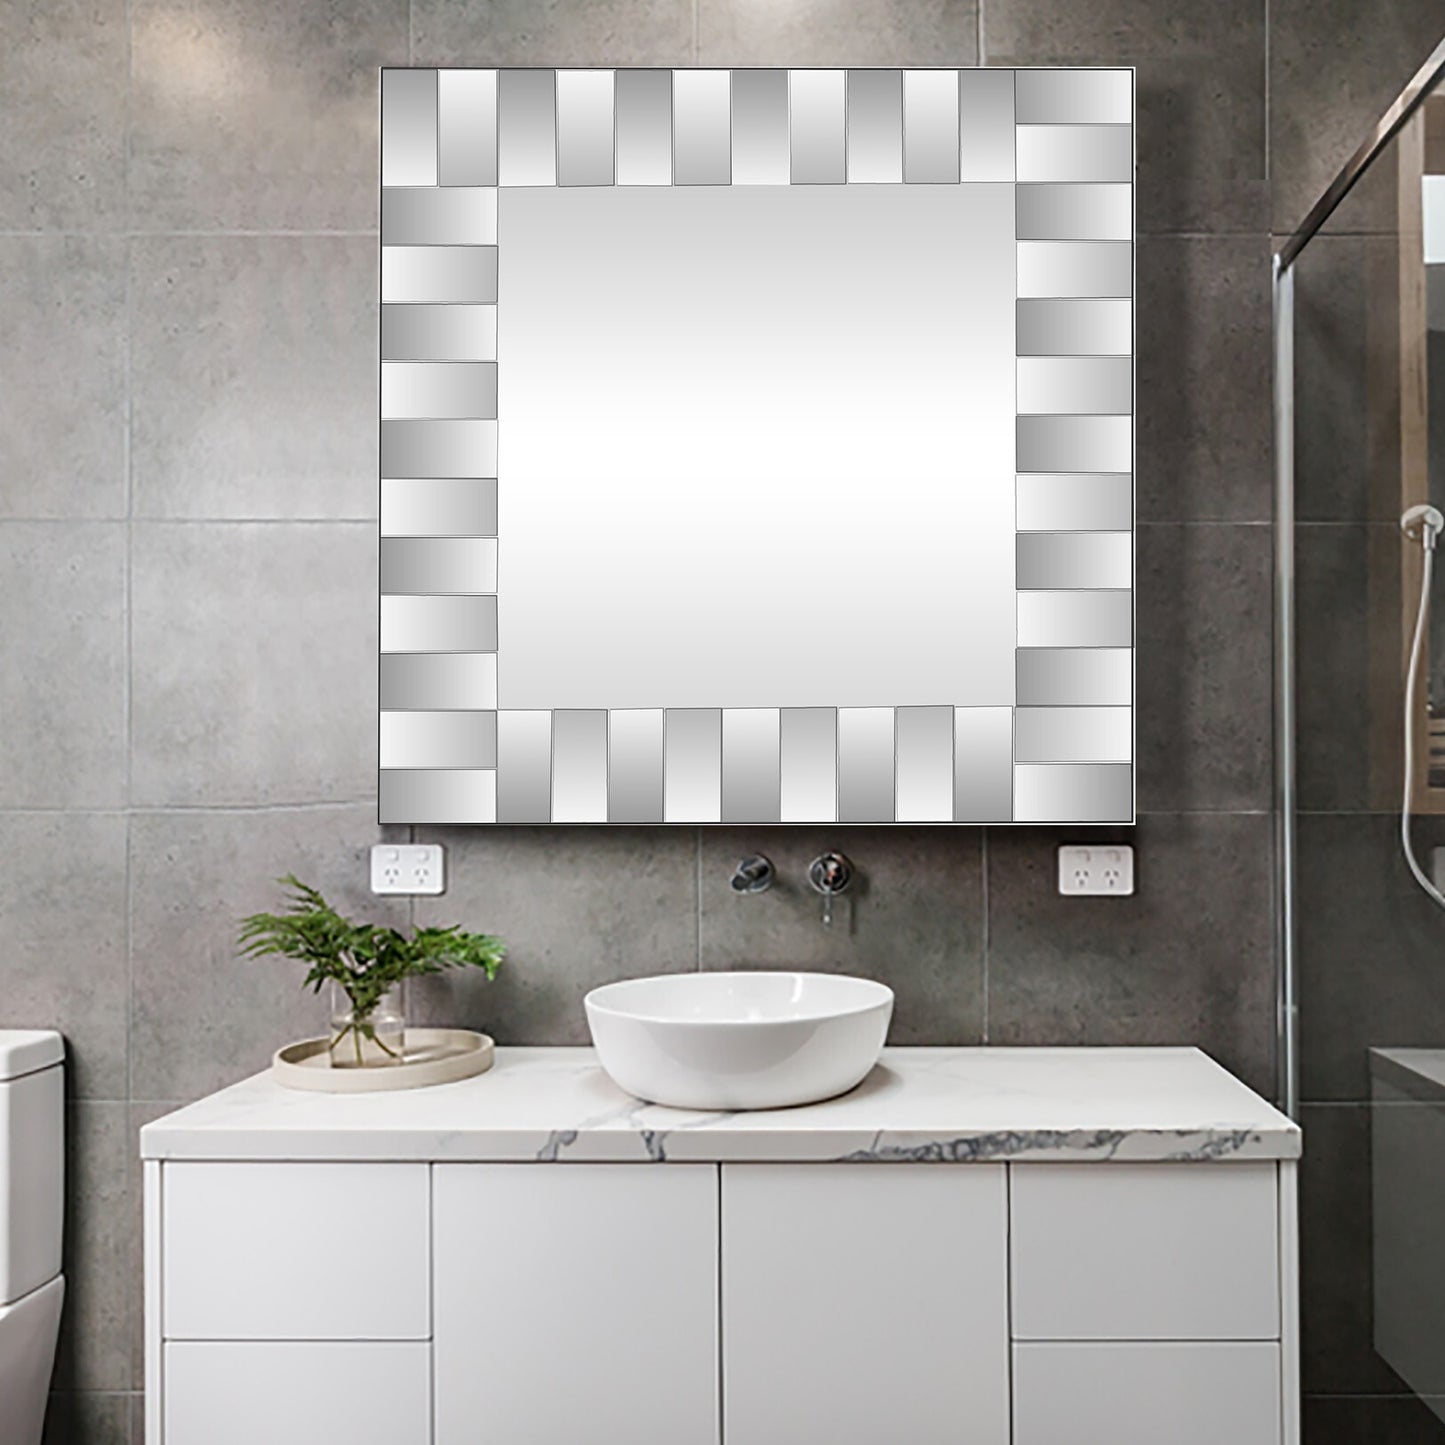 28" Mirrored Square Accent Mirror Wall Mounted With Glass Frame